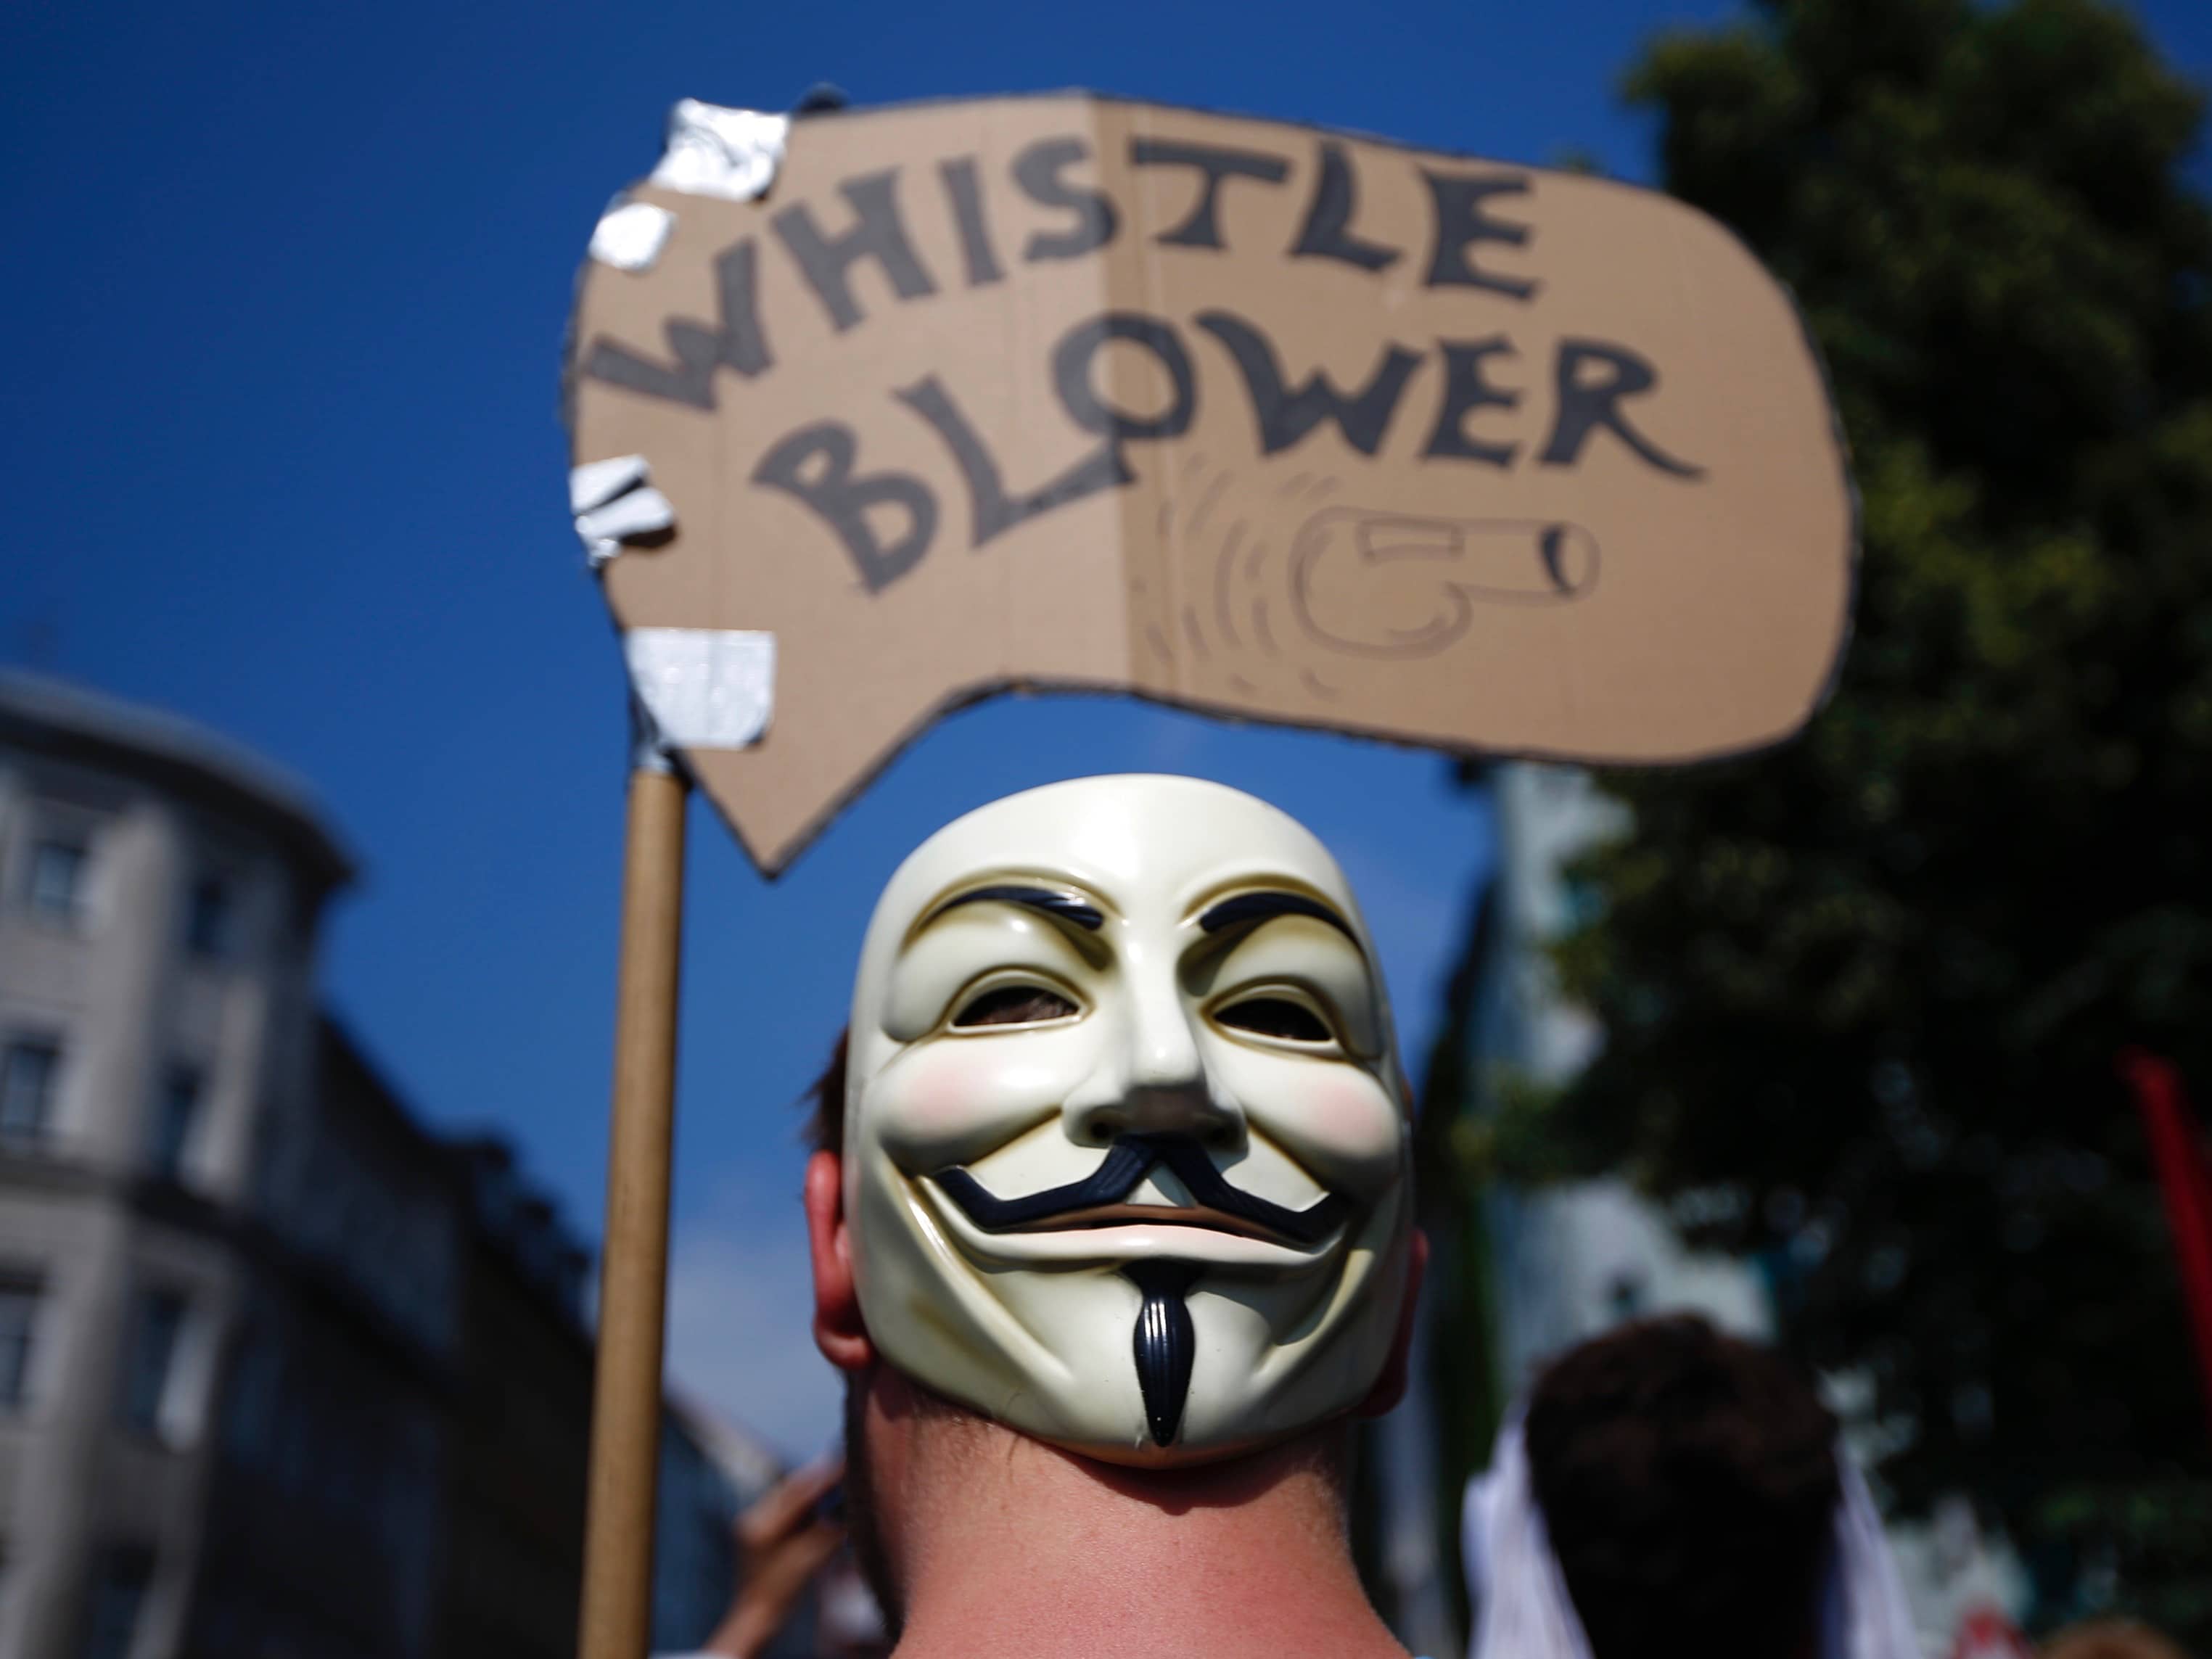 A protester wearing a Guy Fawkes mask attends a demonstration in solidarity with whistleblowers in Berlin, 27 July 2013, REUTERS/Pawel Kopczynski